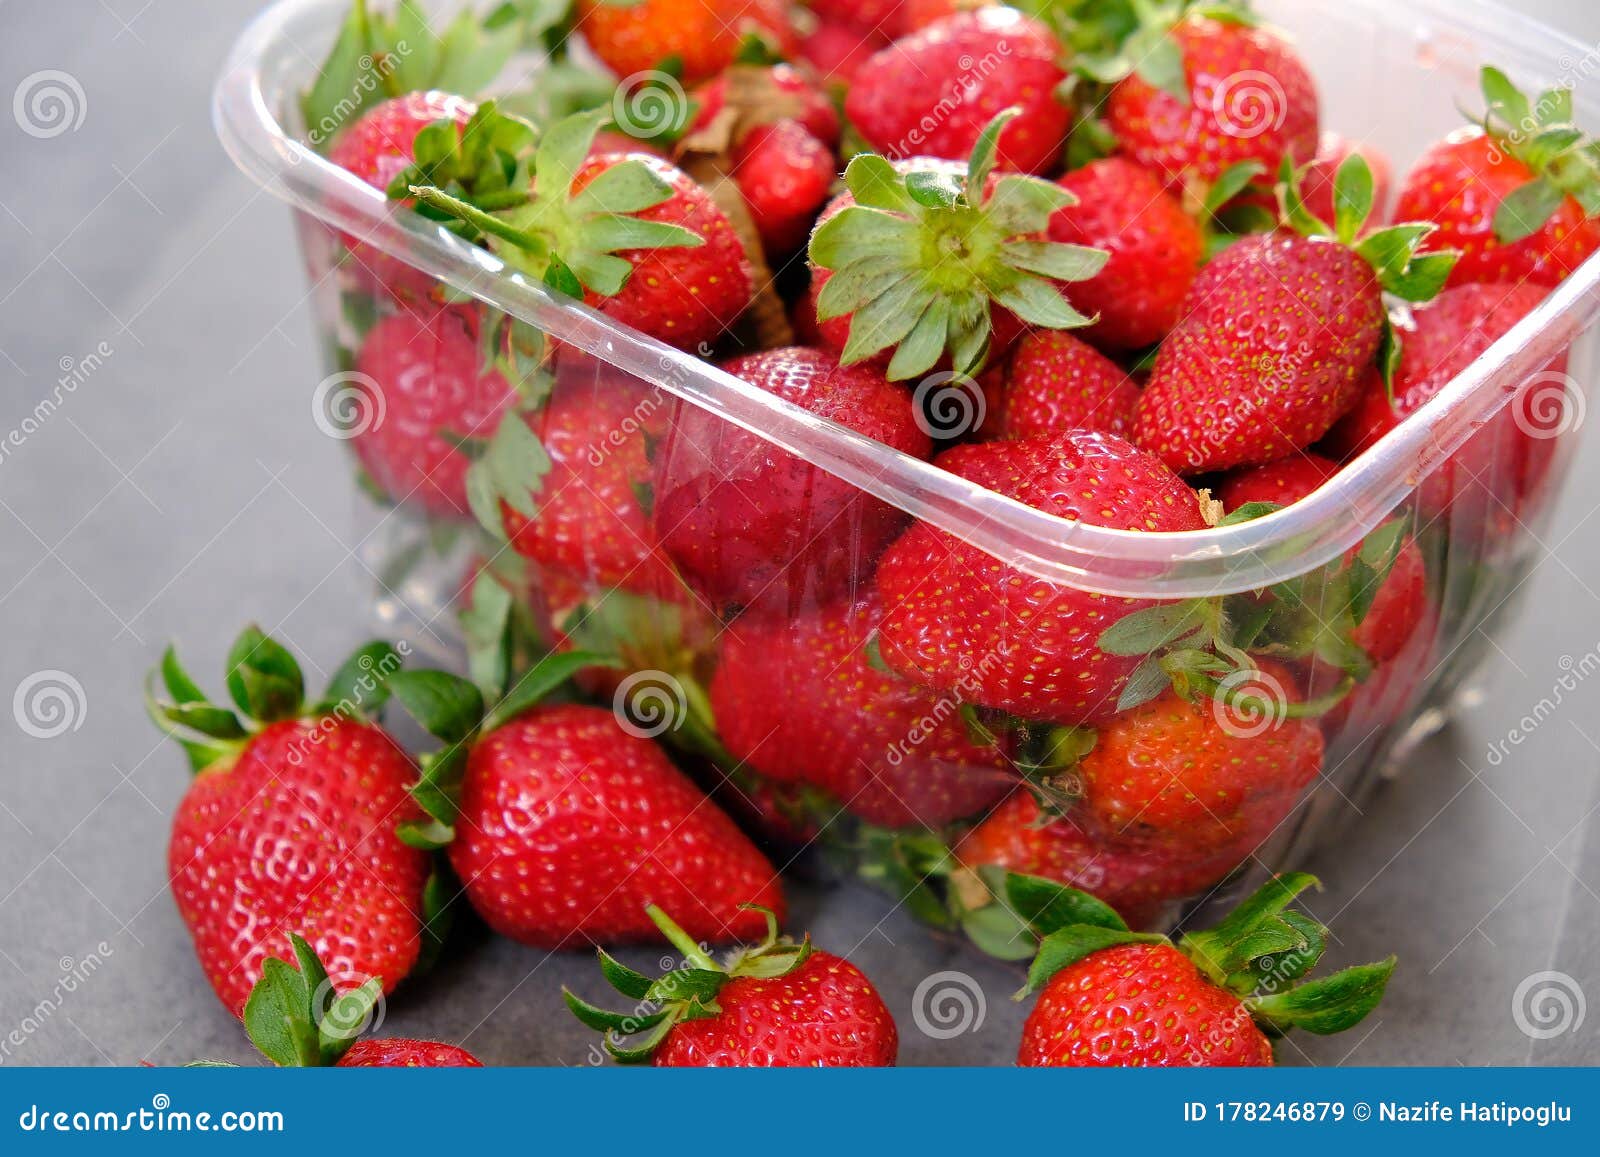 Close Up of Fresh Strawberries in Plastic Box Stock Image - Image of ...